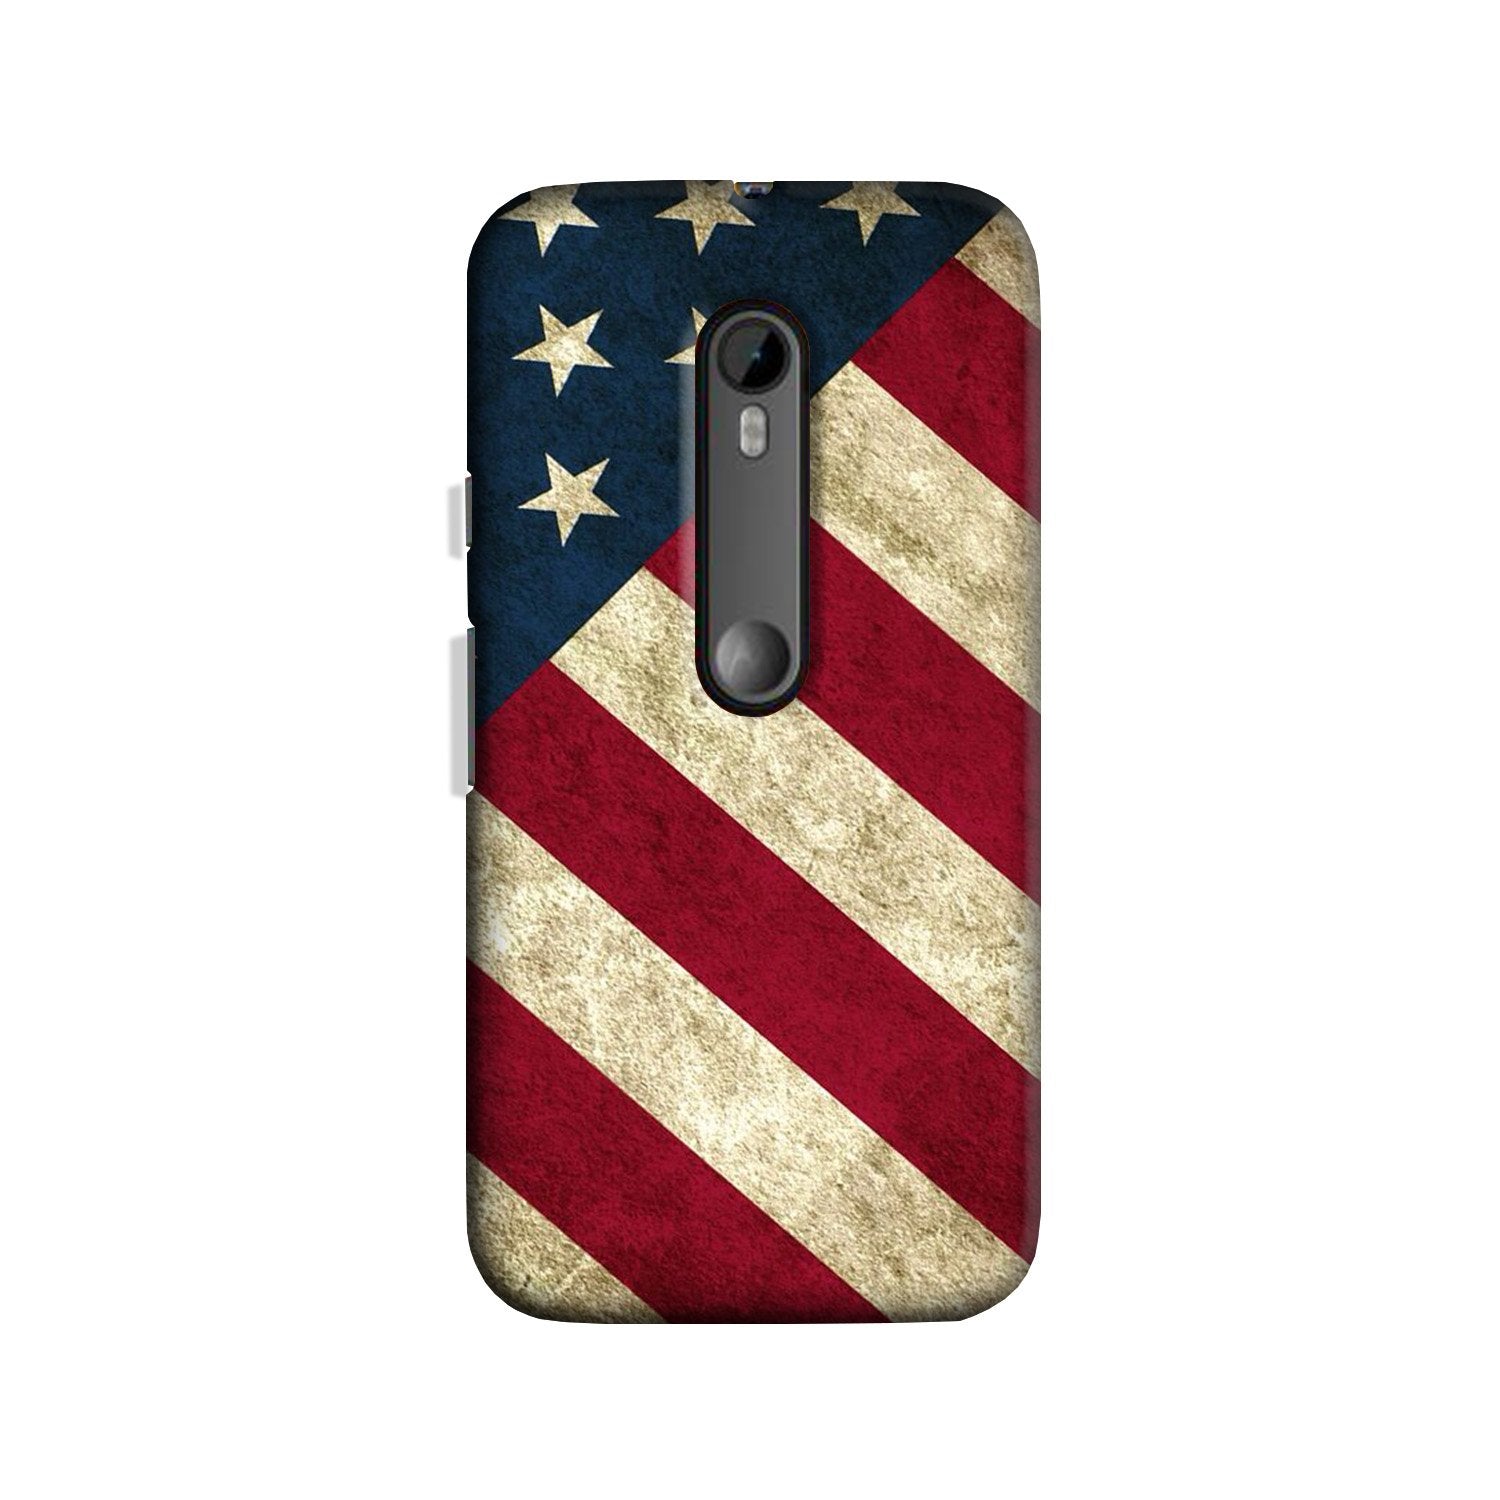 America Case for Moto X Play